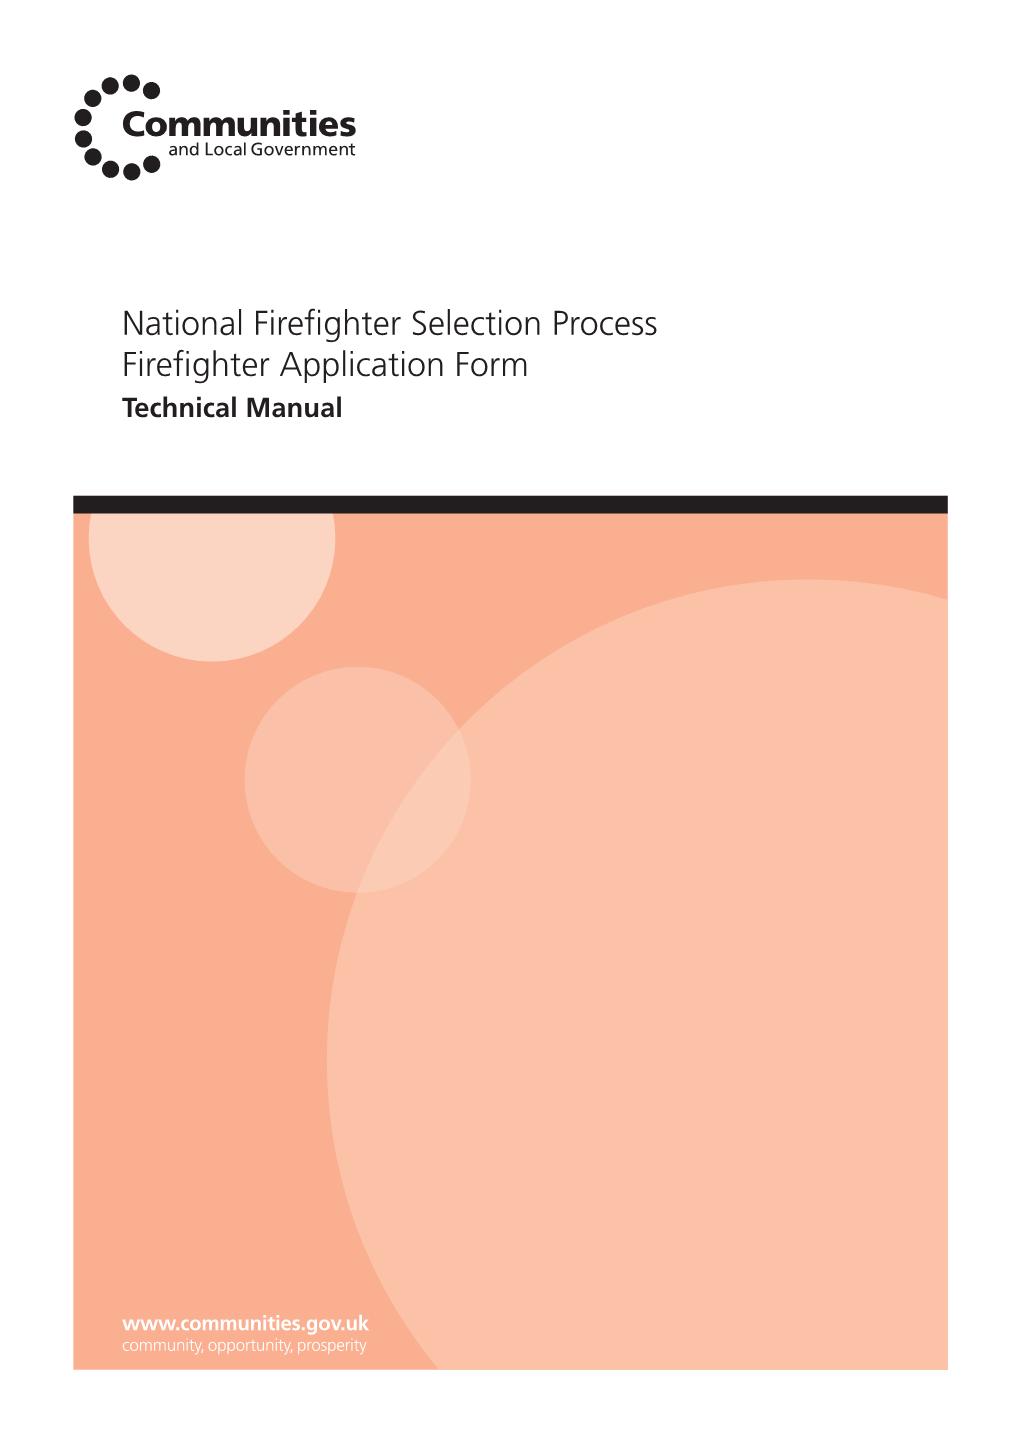 National Firefighter Selection Process Firefighter Application Form Technical Manual